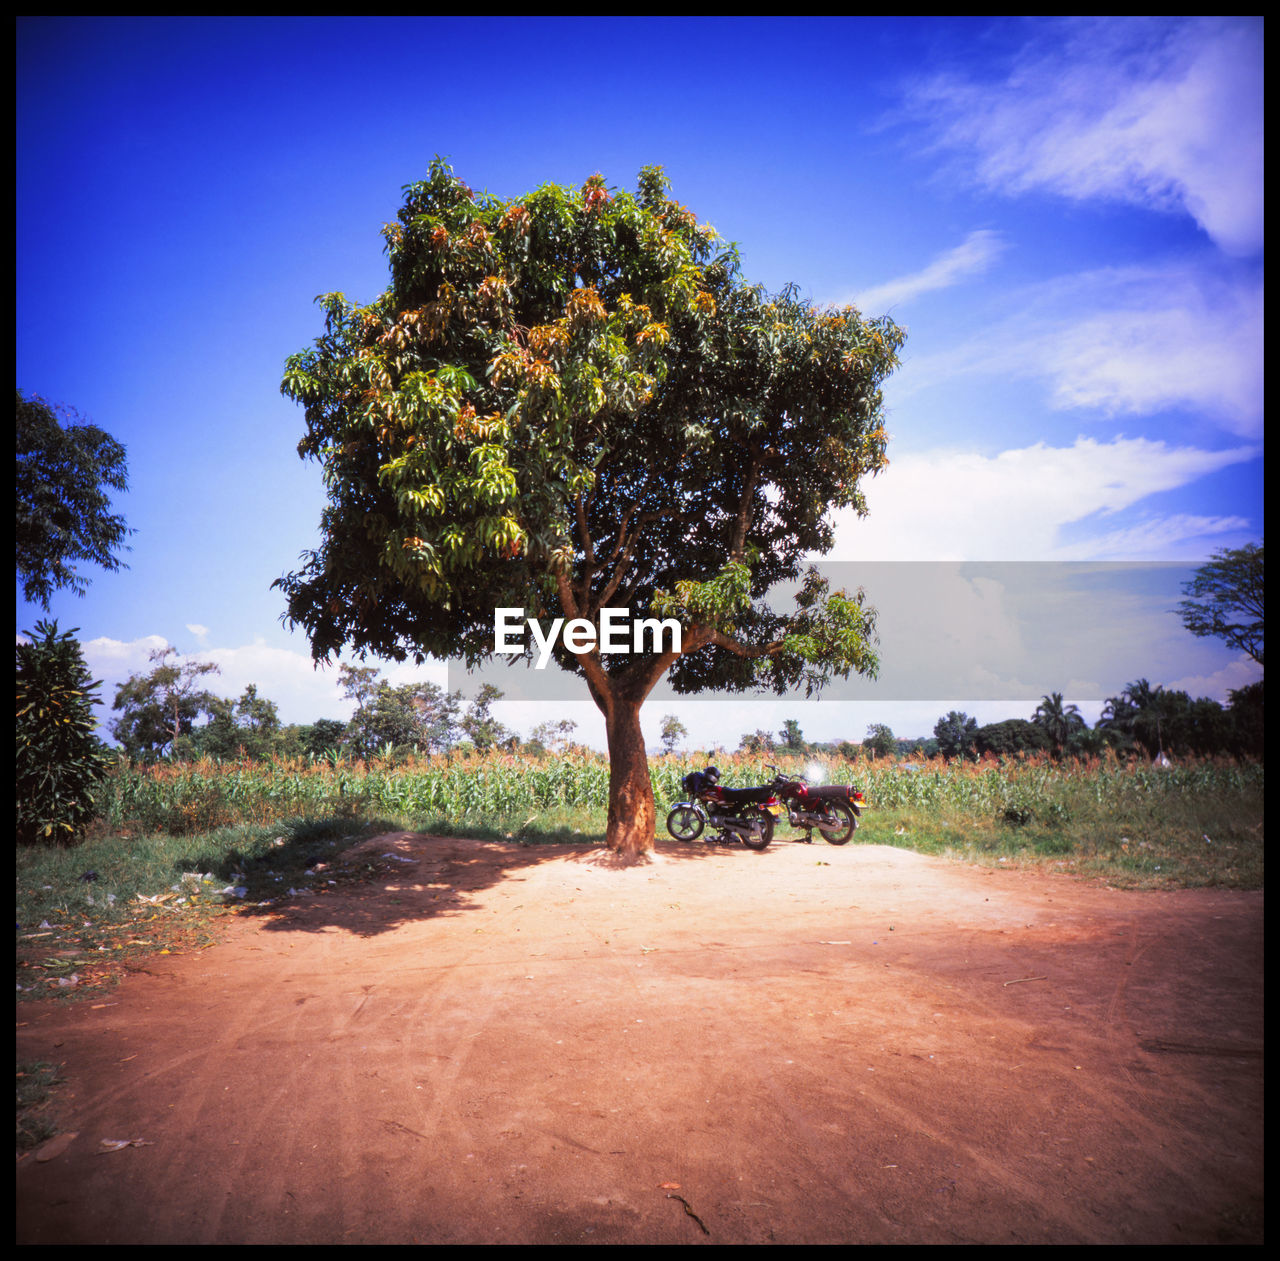 Nature of Uganda Adventure Africa African Cow African Sky African Tree Analogue Photography Bull Bull In Nature Cattle City Colours Cow Cow In Nature Horns Kira Kuh & Co Lomography Nature No People Outdoors Savanna Slide Photography Travel Trip Uganda  The Great Outdoors - 2017 EyeEm Awards